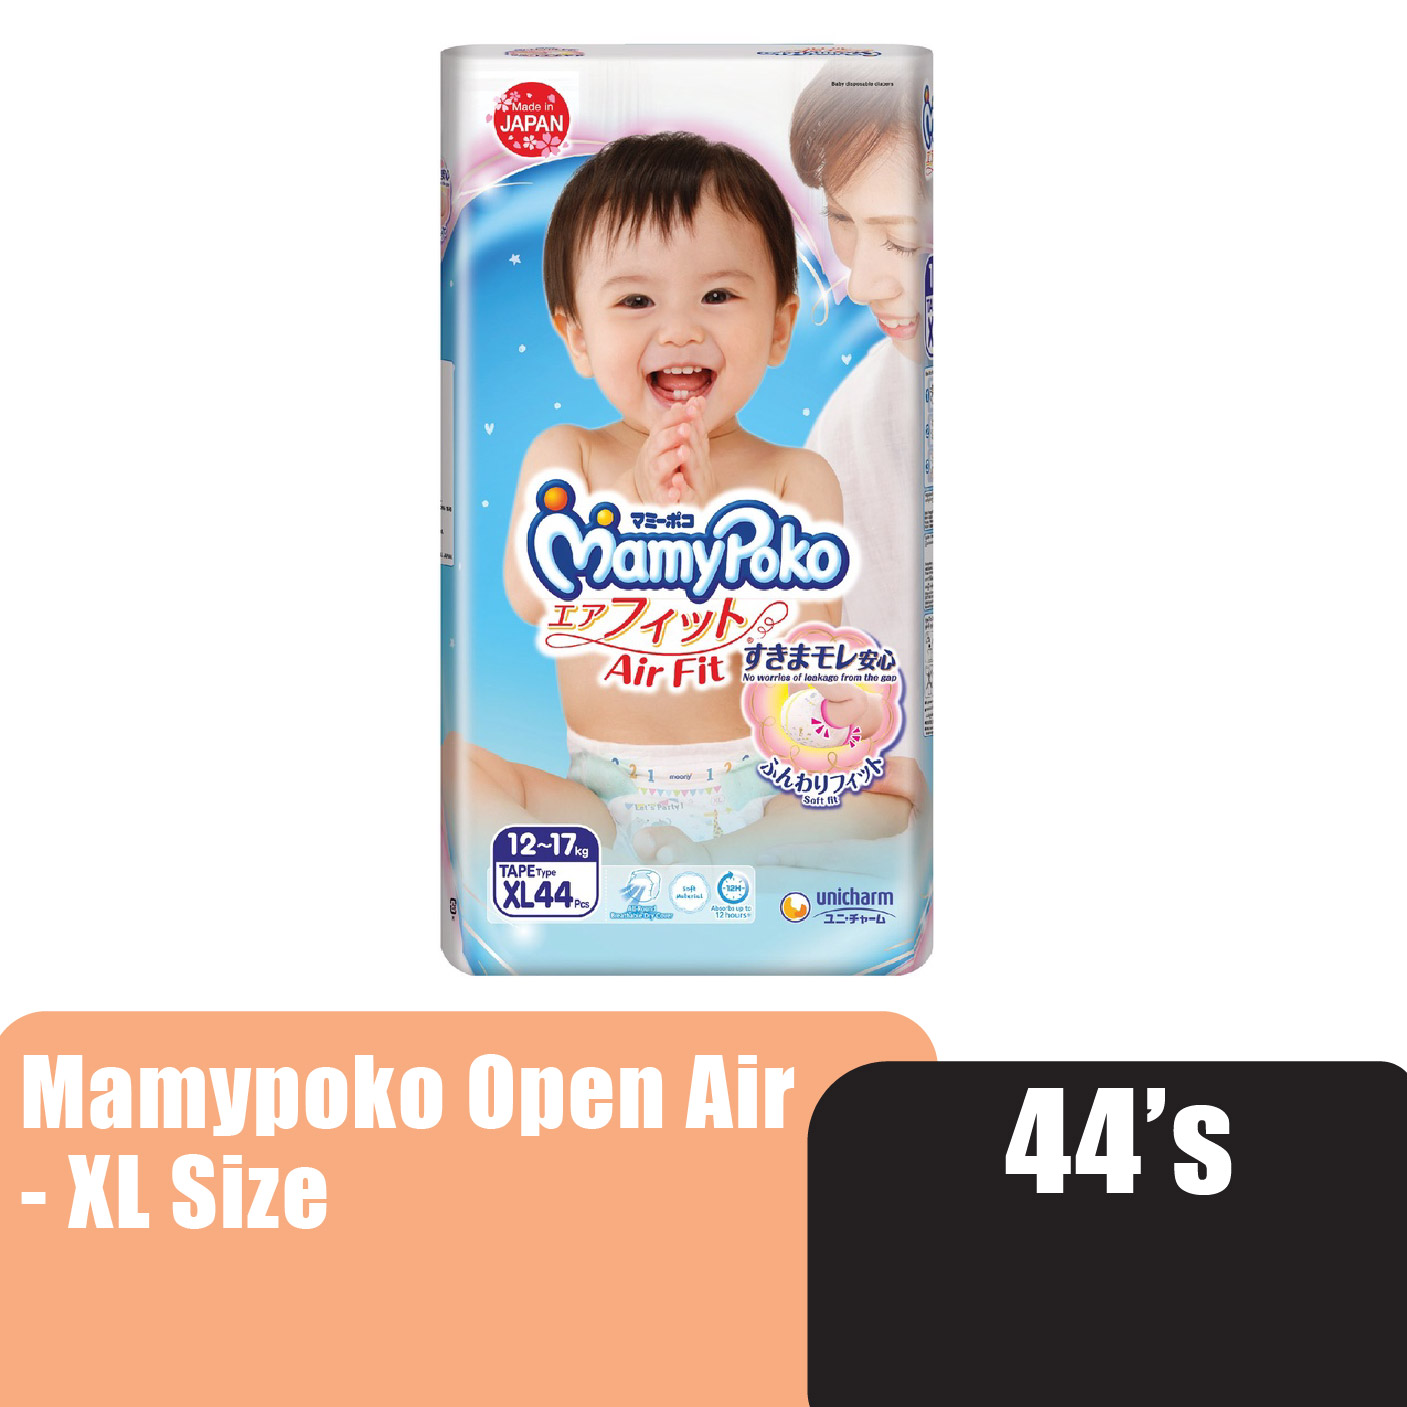 Mamypoko Open Air Fit Tape Pampers baby 44's - XL size Premium quality Pempes baby made in Japan